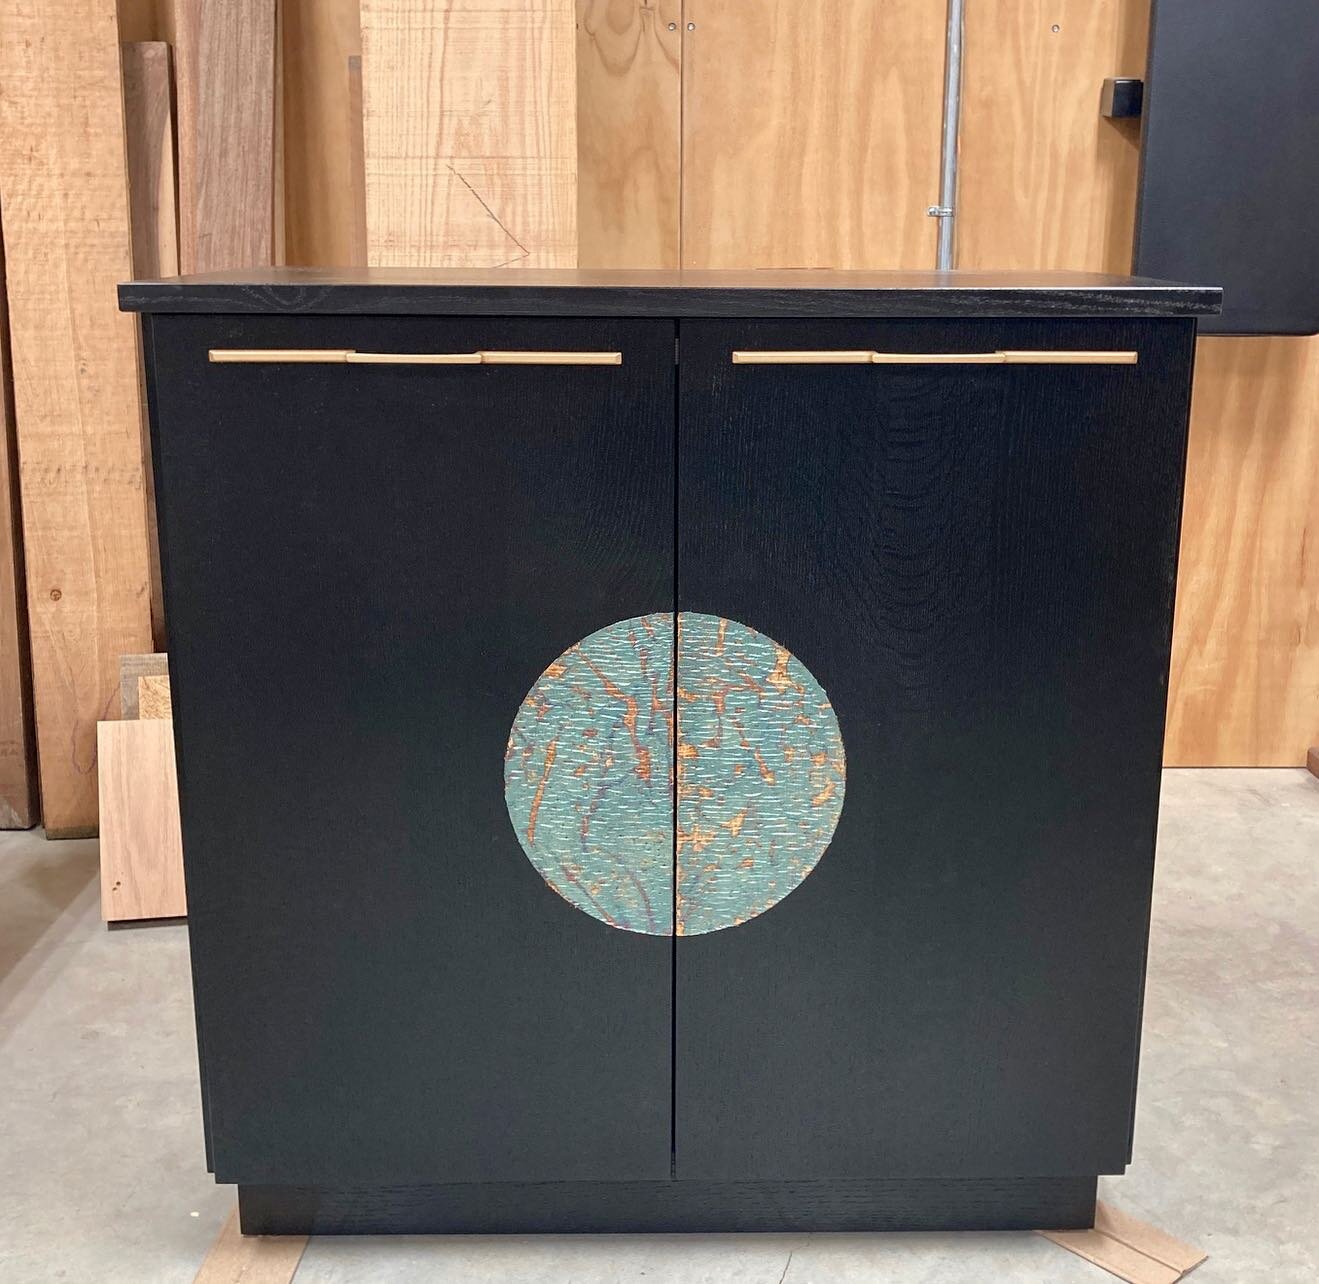 Here is the cabinet that will accompany the vanity from yesterday. Same same on materials and finish, but I liked the way this patination turned out.

*
*
*
#vvfurniture #customfurniture #cabinetmaking #customcabinets #woodworking #gilding #patinatio